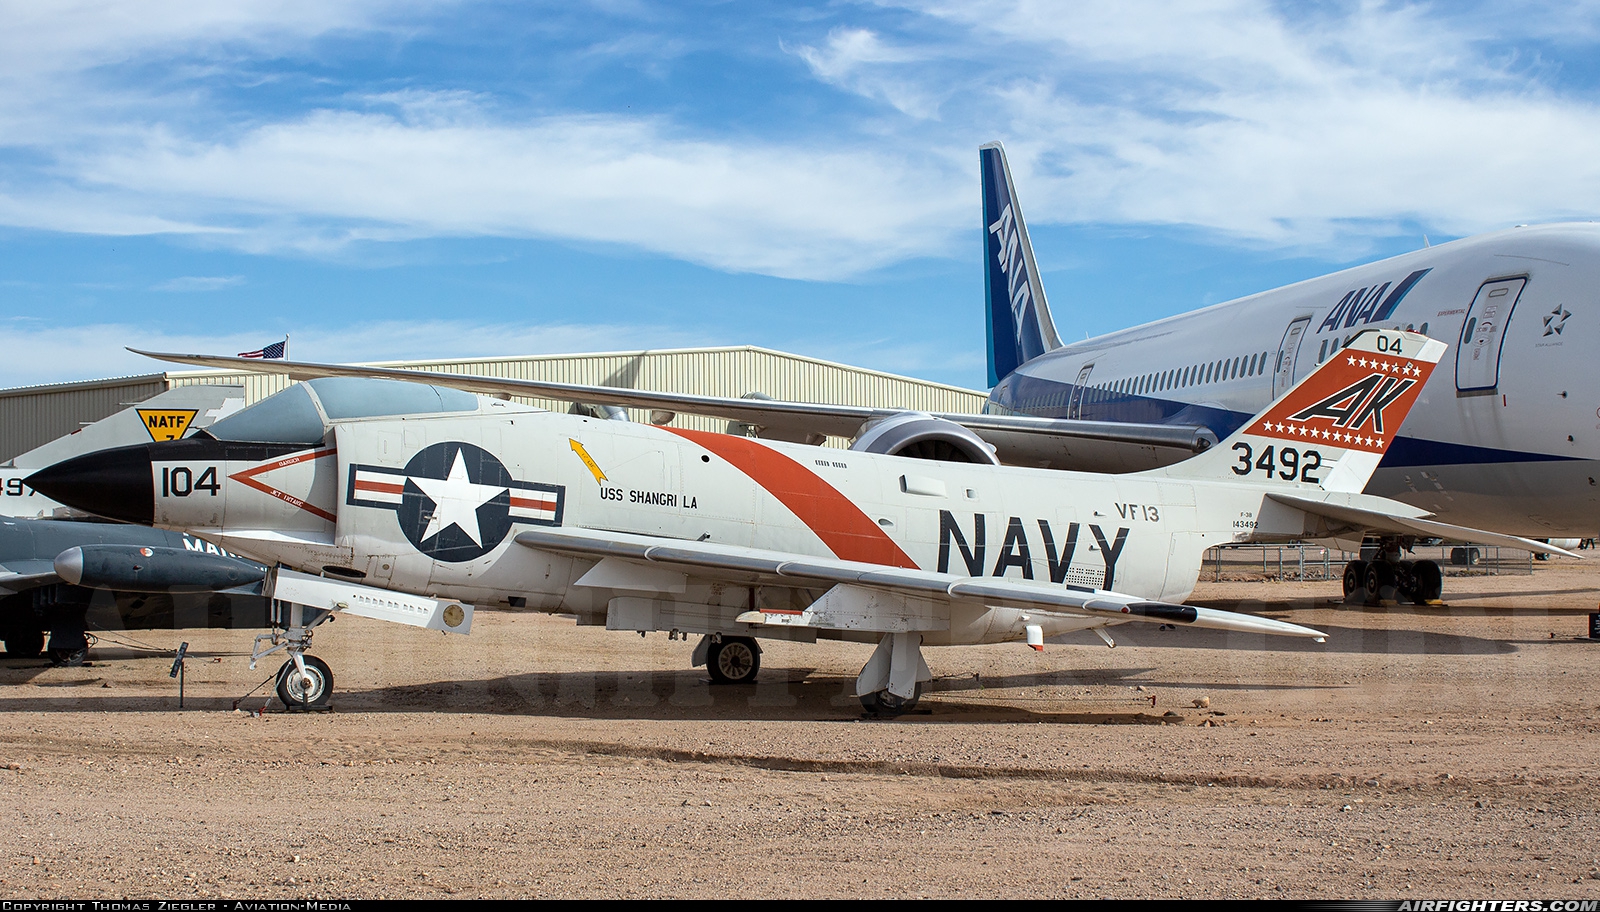 USA - Navy McDonnell F3B Demon 145221 at Tucson - Pima Air and Space Museum, USA